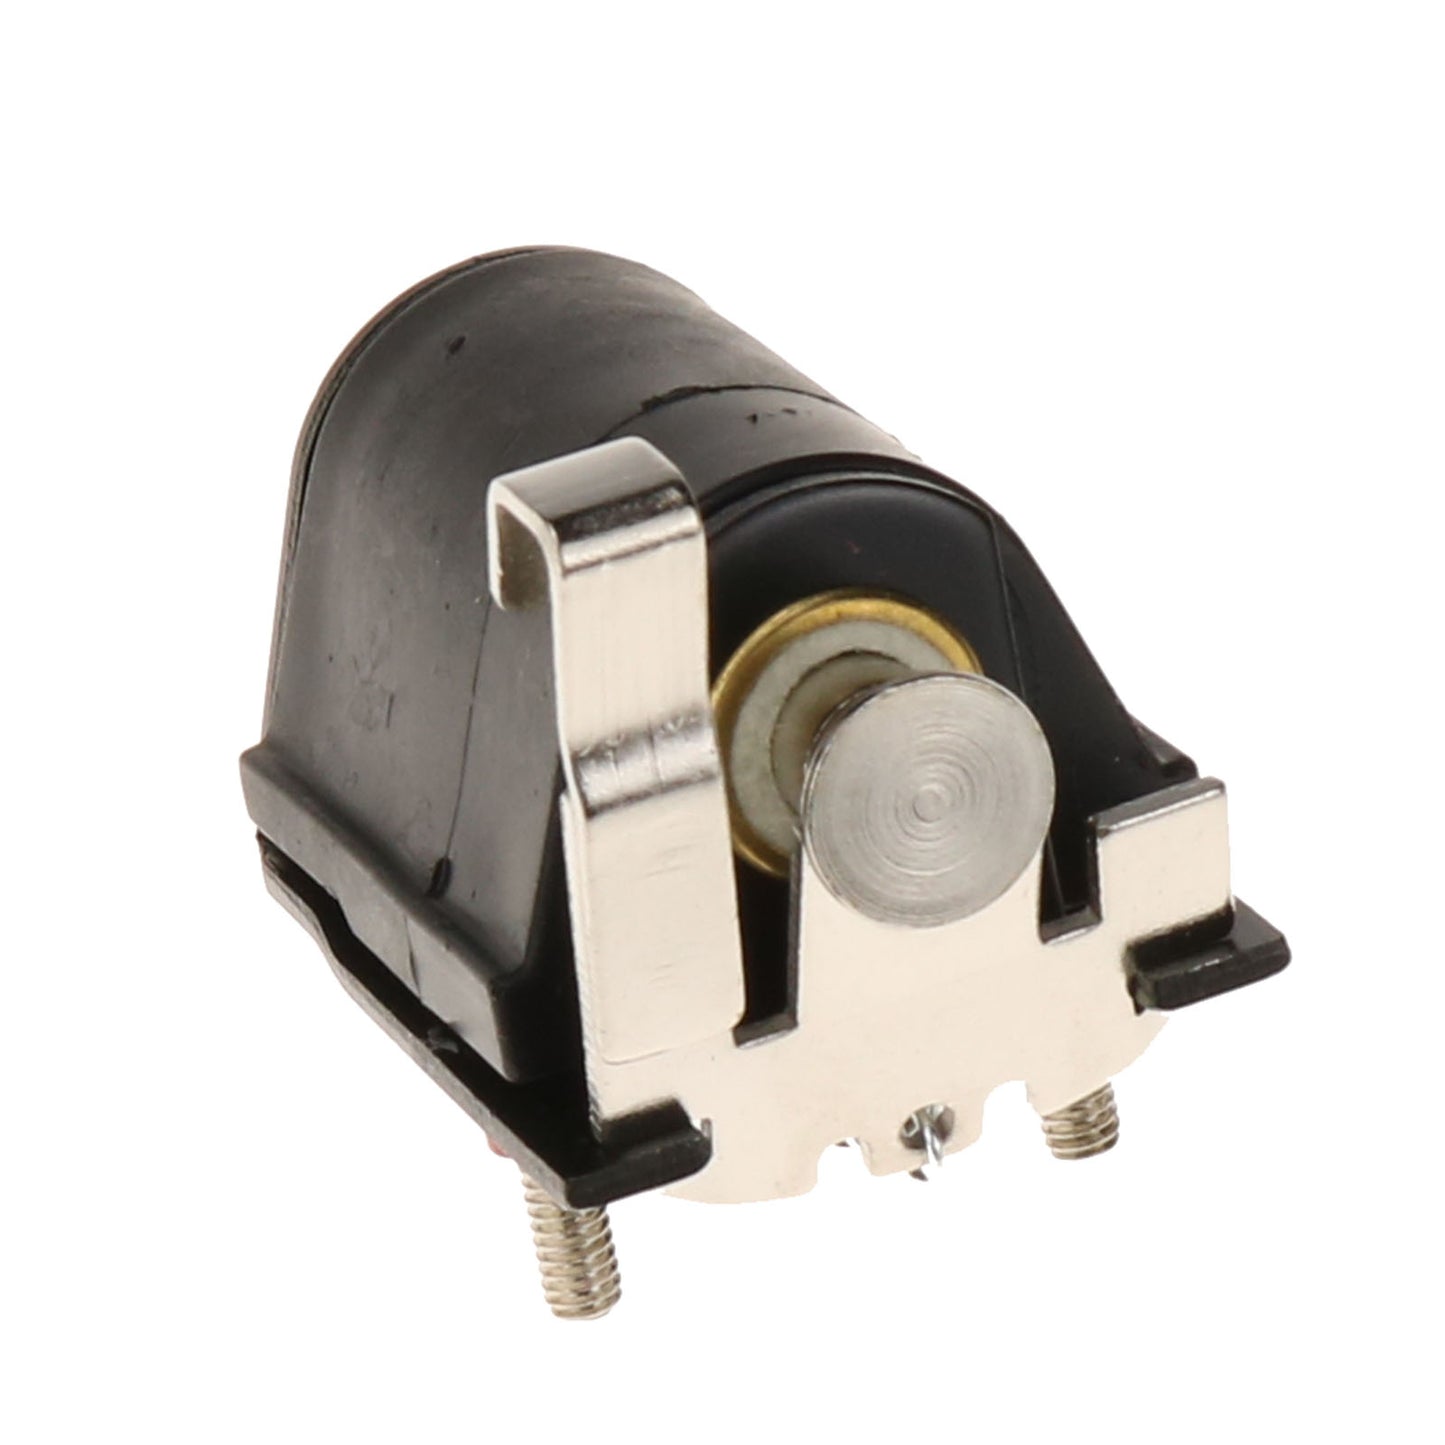 New Fuel Shut Off Solenoid 26214 Compatible with Stanadyne Injection Pump Roosa Master 6.2 6.9 7.3 5.7 6.5 for John Deere RE62240 RE37089